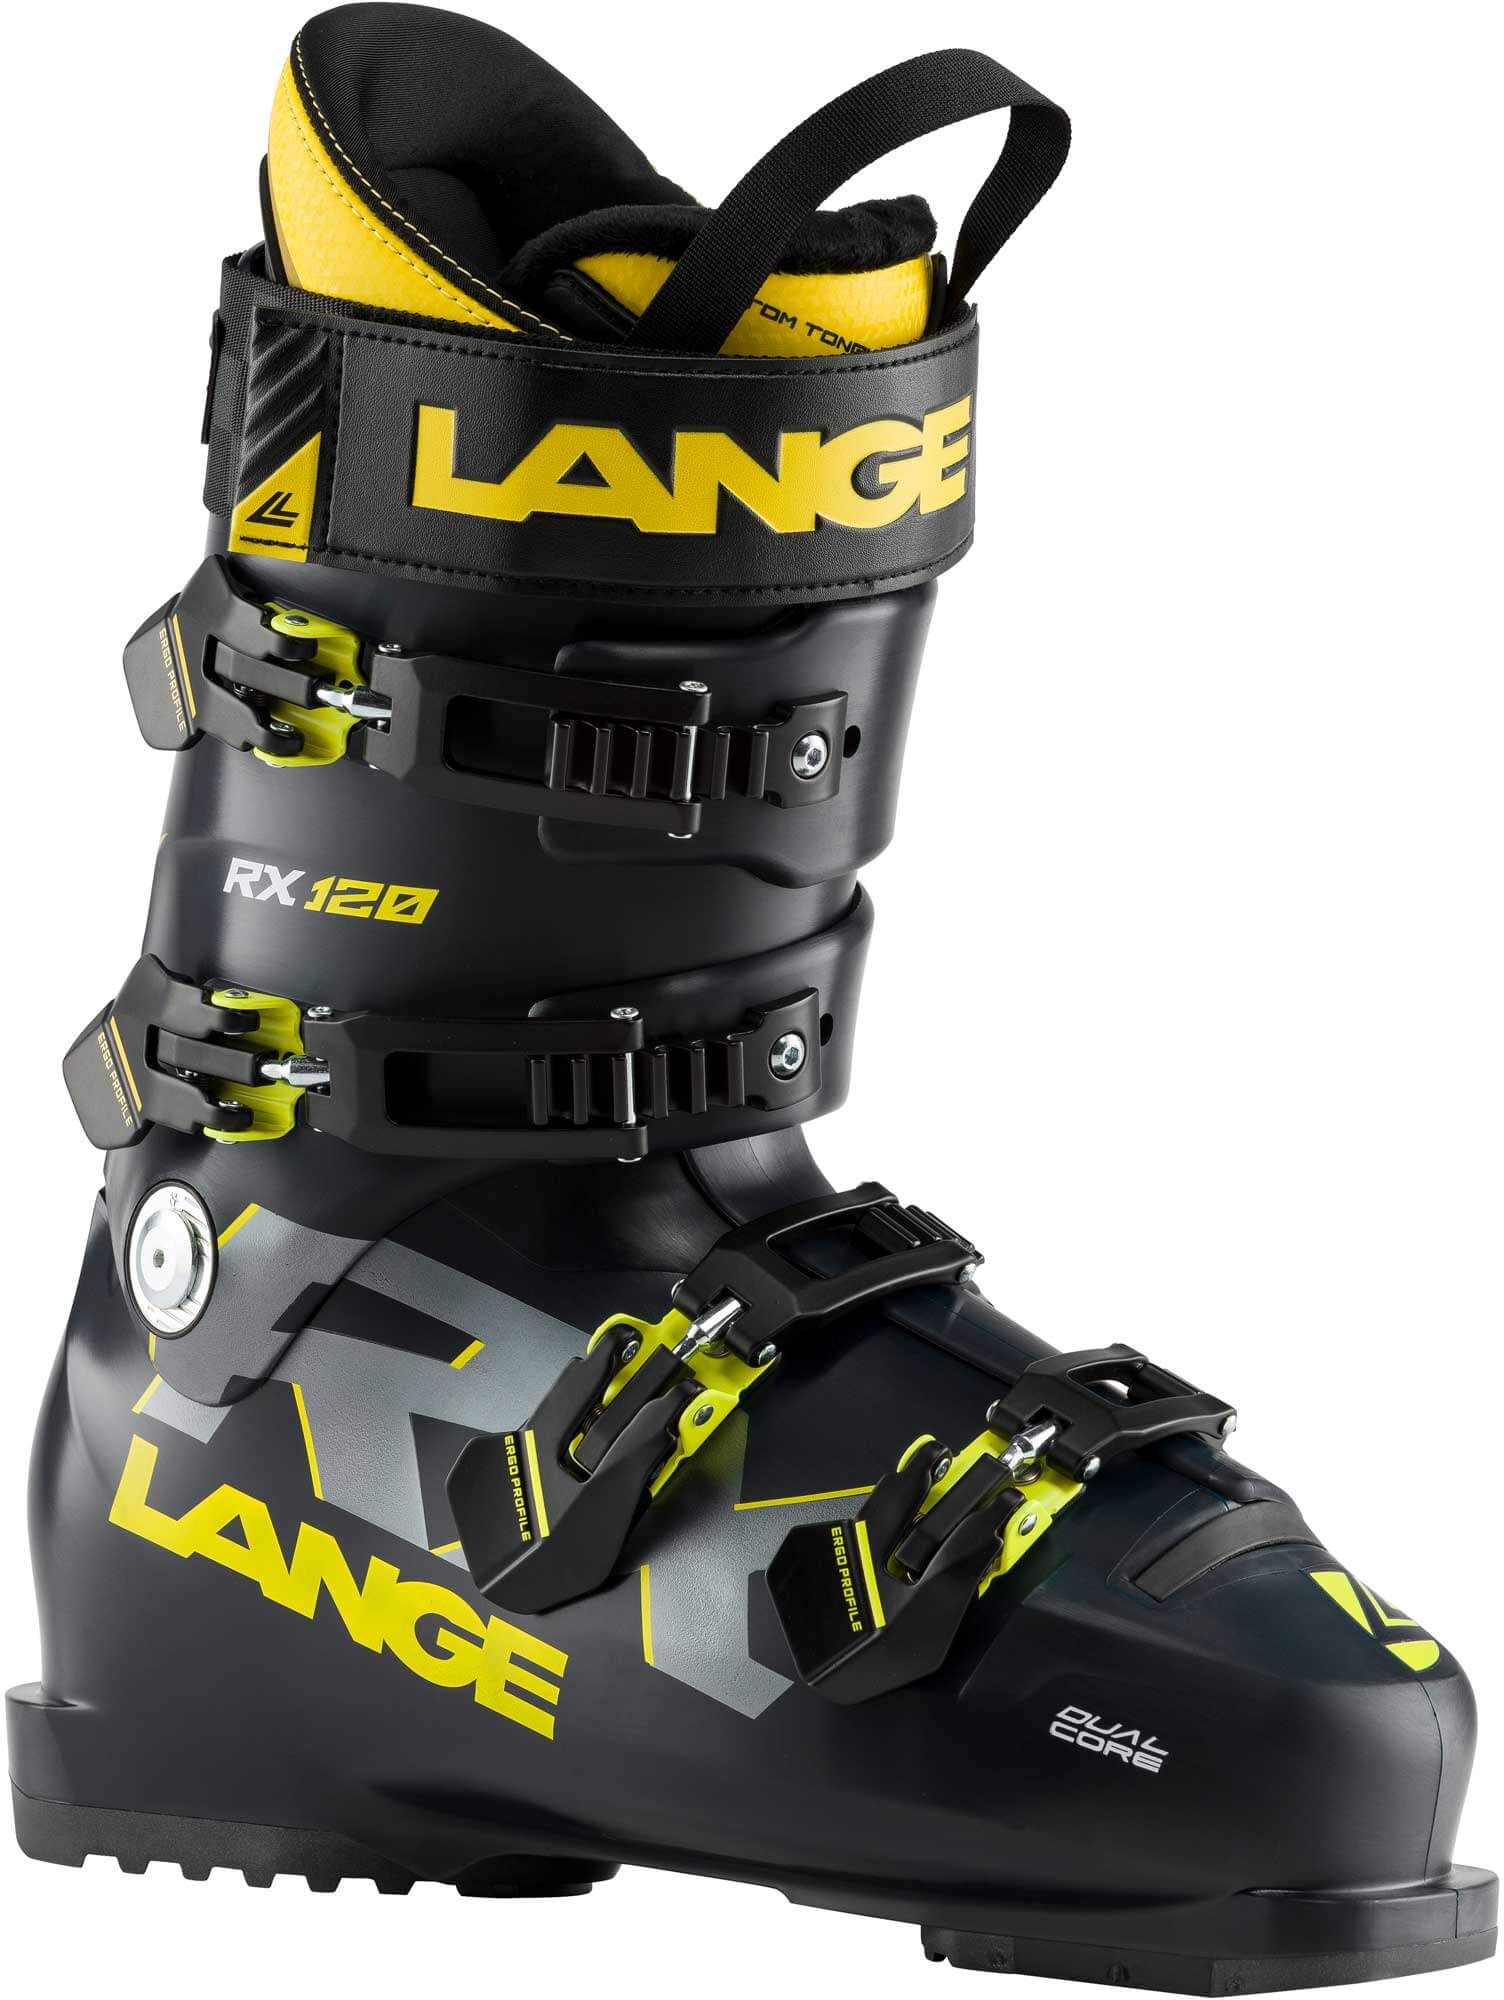 Lange RX 120 Ski Boots 2020 The Boot Pro